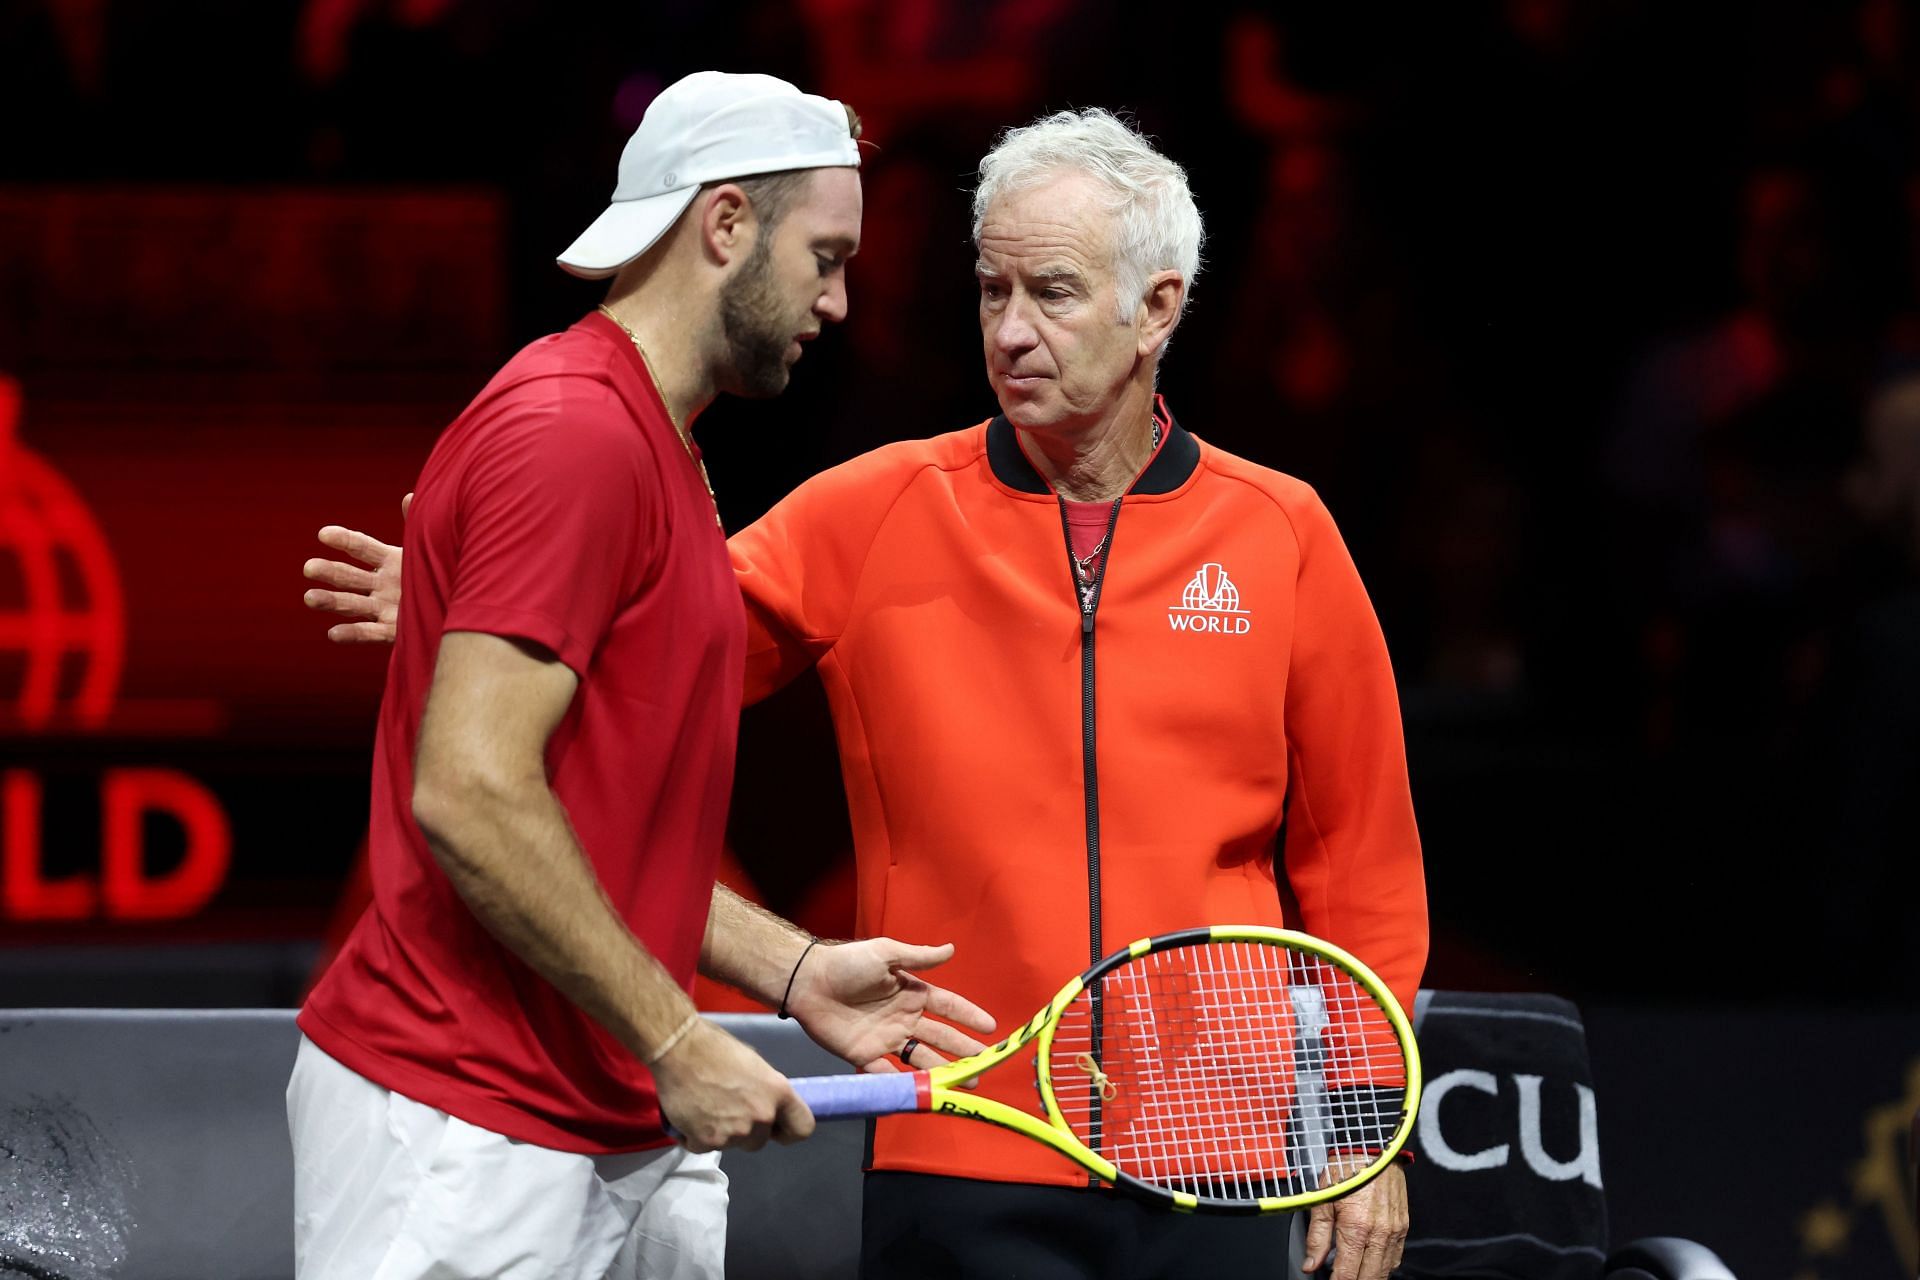 John McEnroe with Jack Sock at the Laver Cup